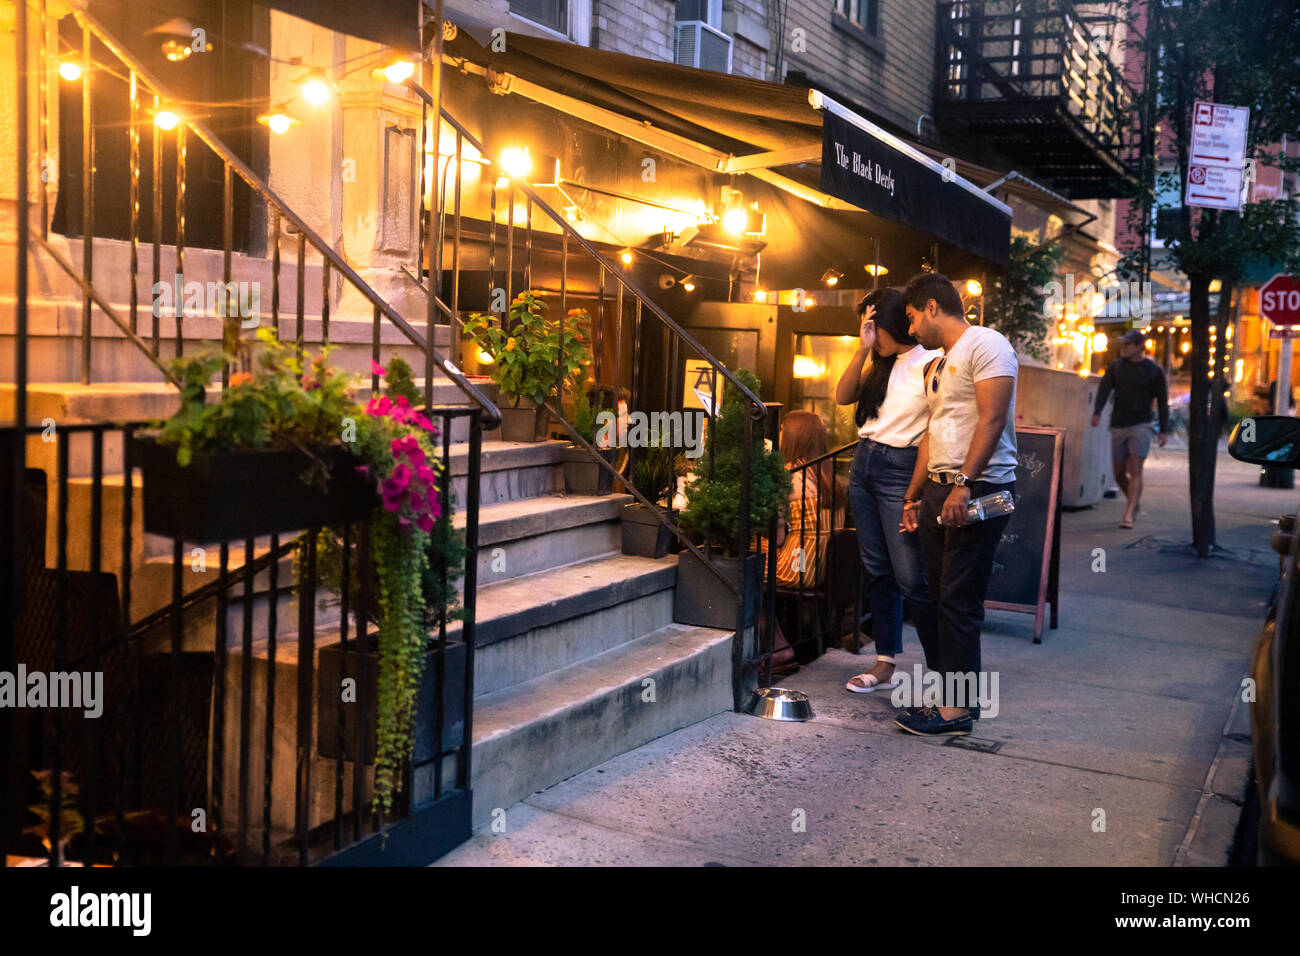 NEW YORK CITY - AUGUST 24, 2019: Outdoor restaurant street scene from the West Village in Manhattan with people dining on a Saturday evening. Stock Photo